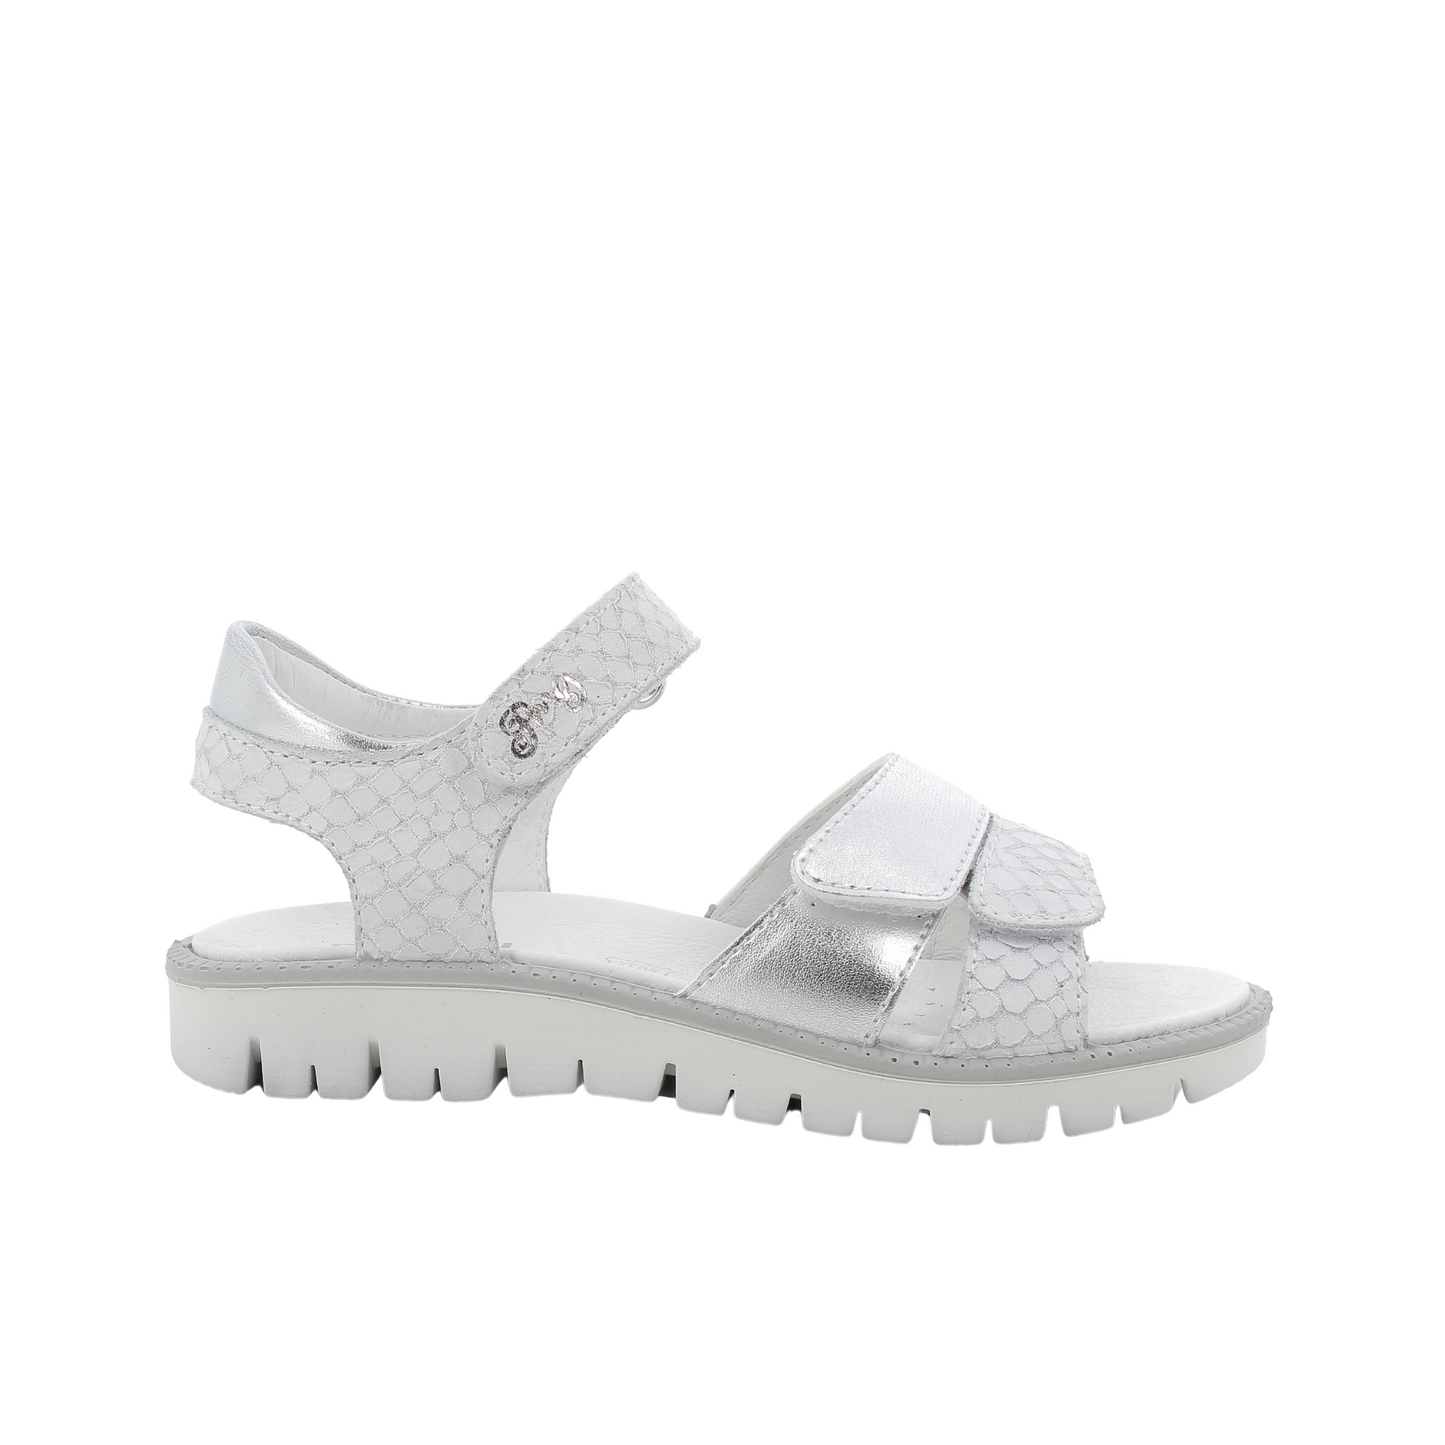 Silver and White Leather Girl's Sandal